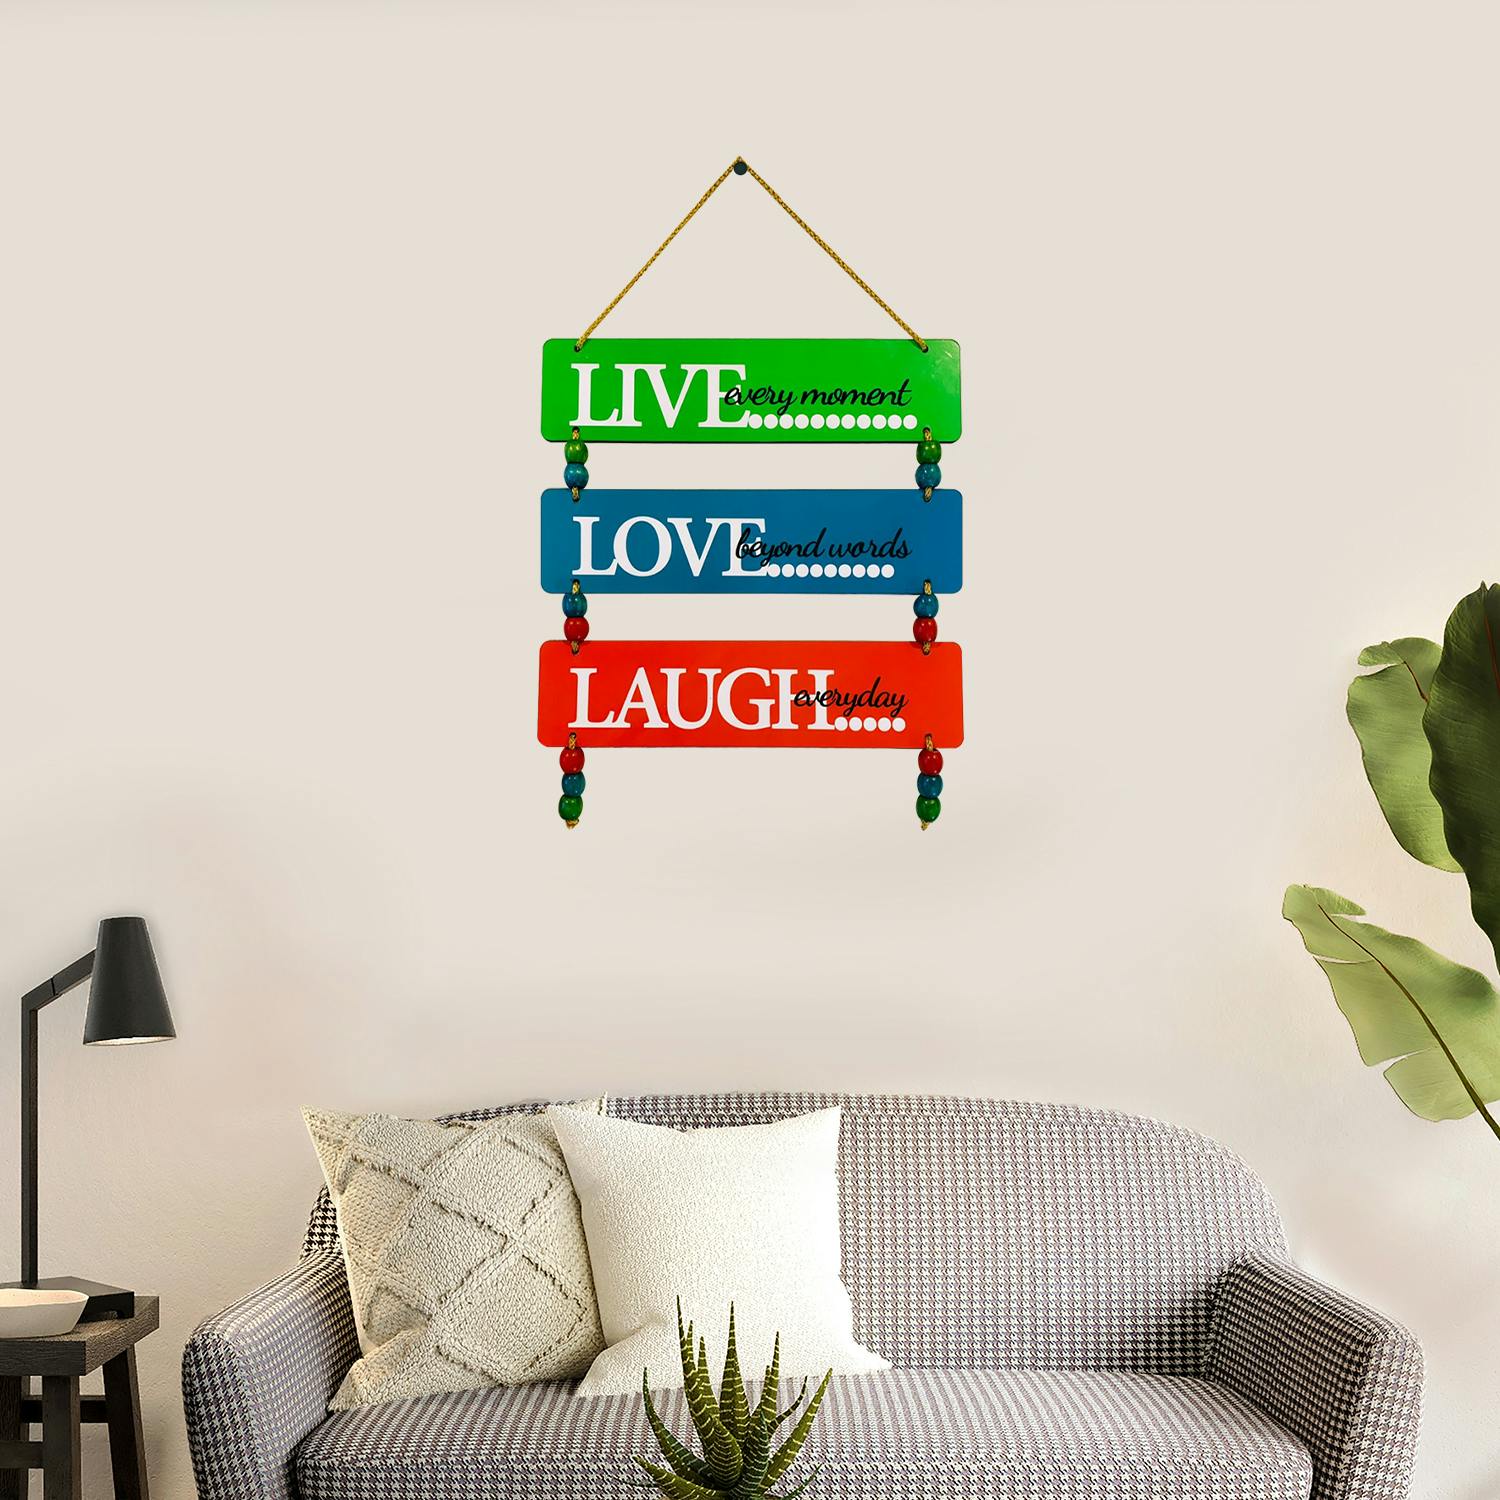 Live, Love, Laugh: Add Inspirational Charm to Your Home with this Wall Hanging!